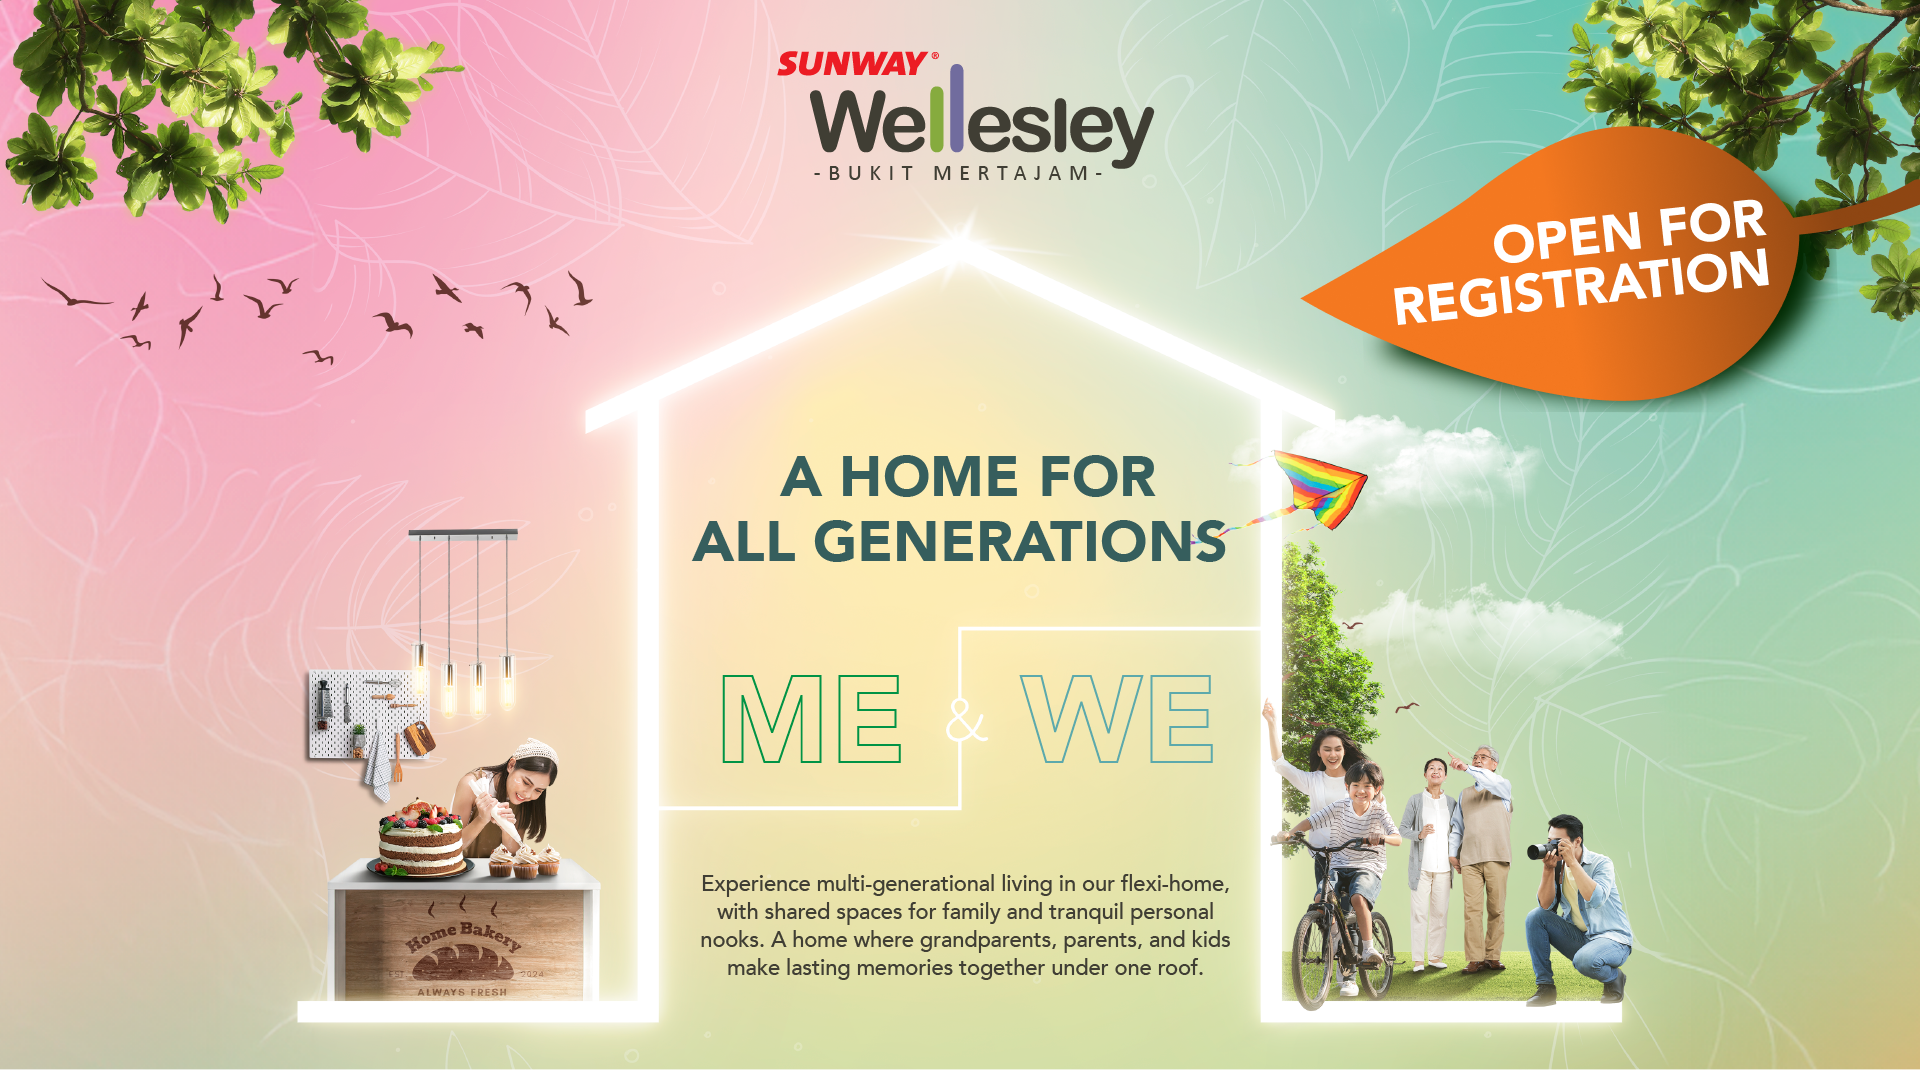 A home for all generations. Me & We.
    Experience multi-generational living in our flexi-home, with shared spaces for family and tranquil personal nooks.